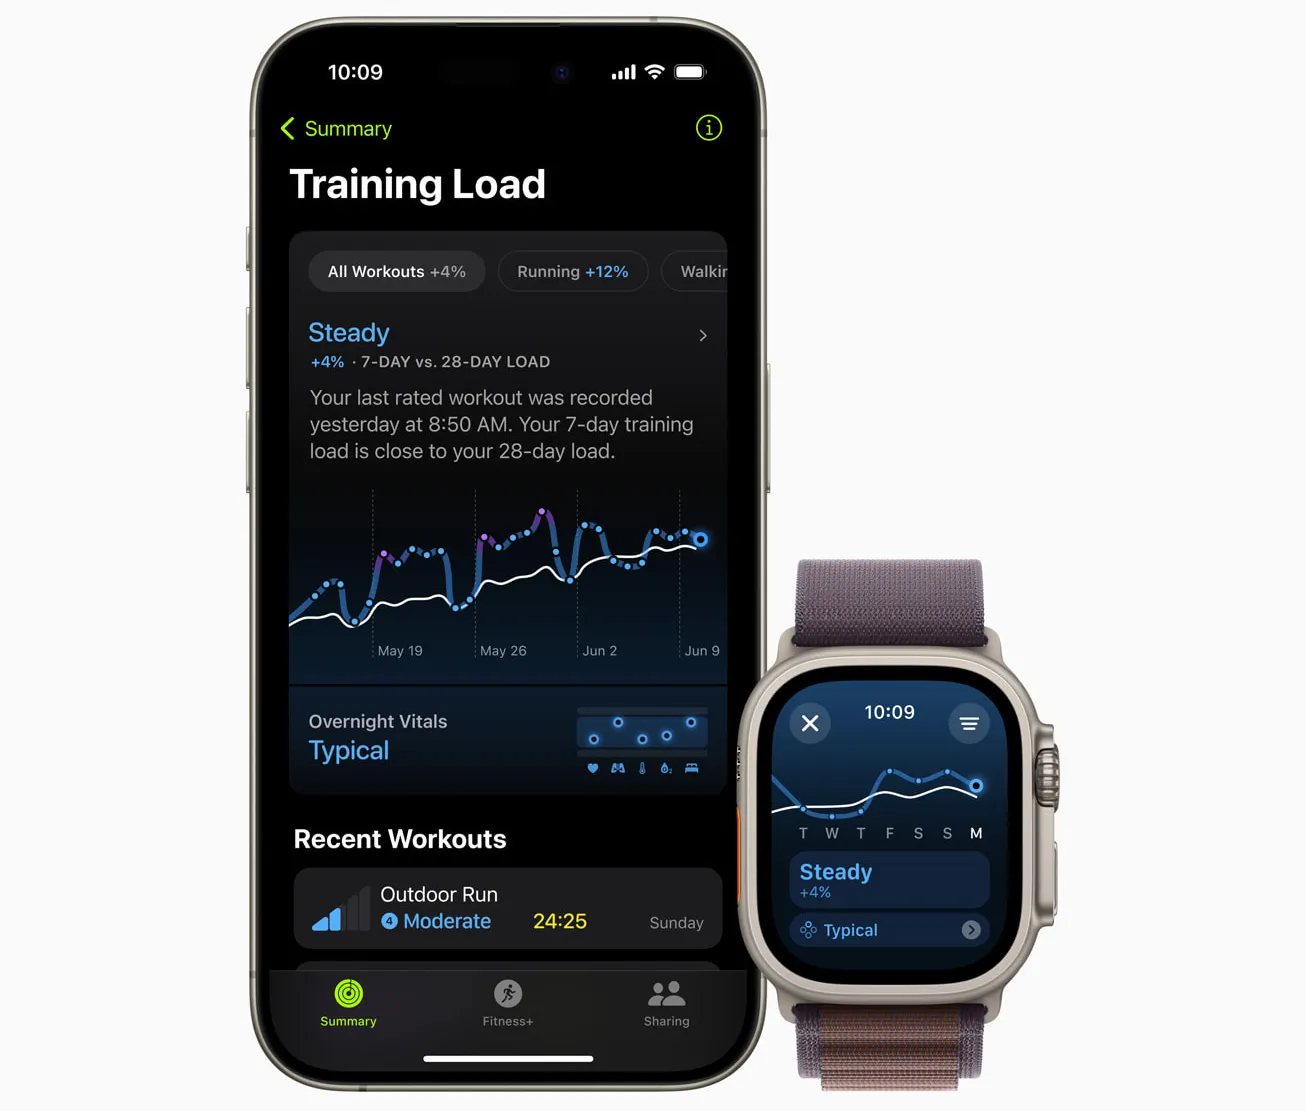 Training load on iPhone and Apple Watch